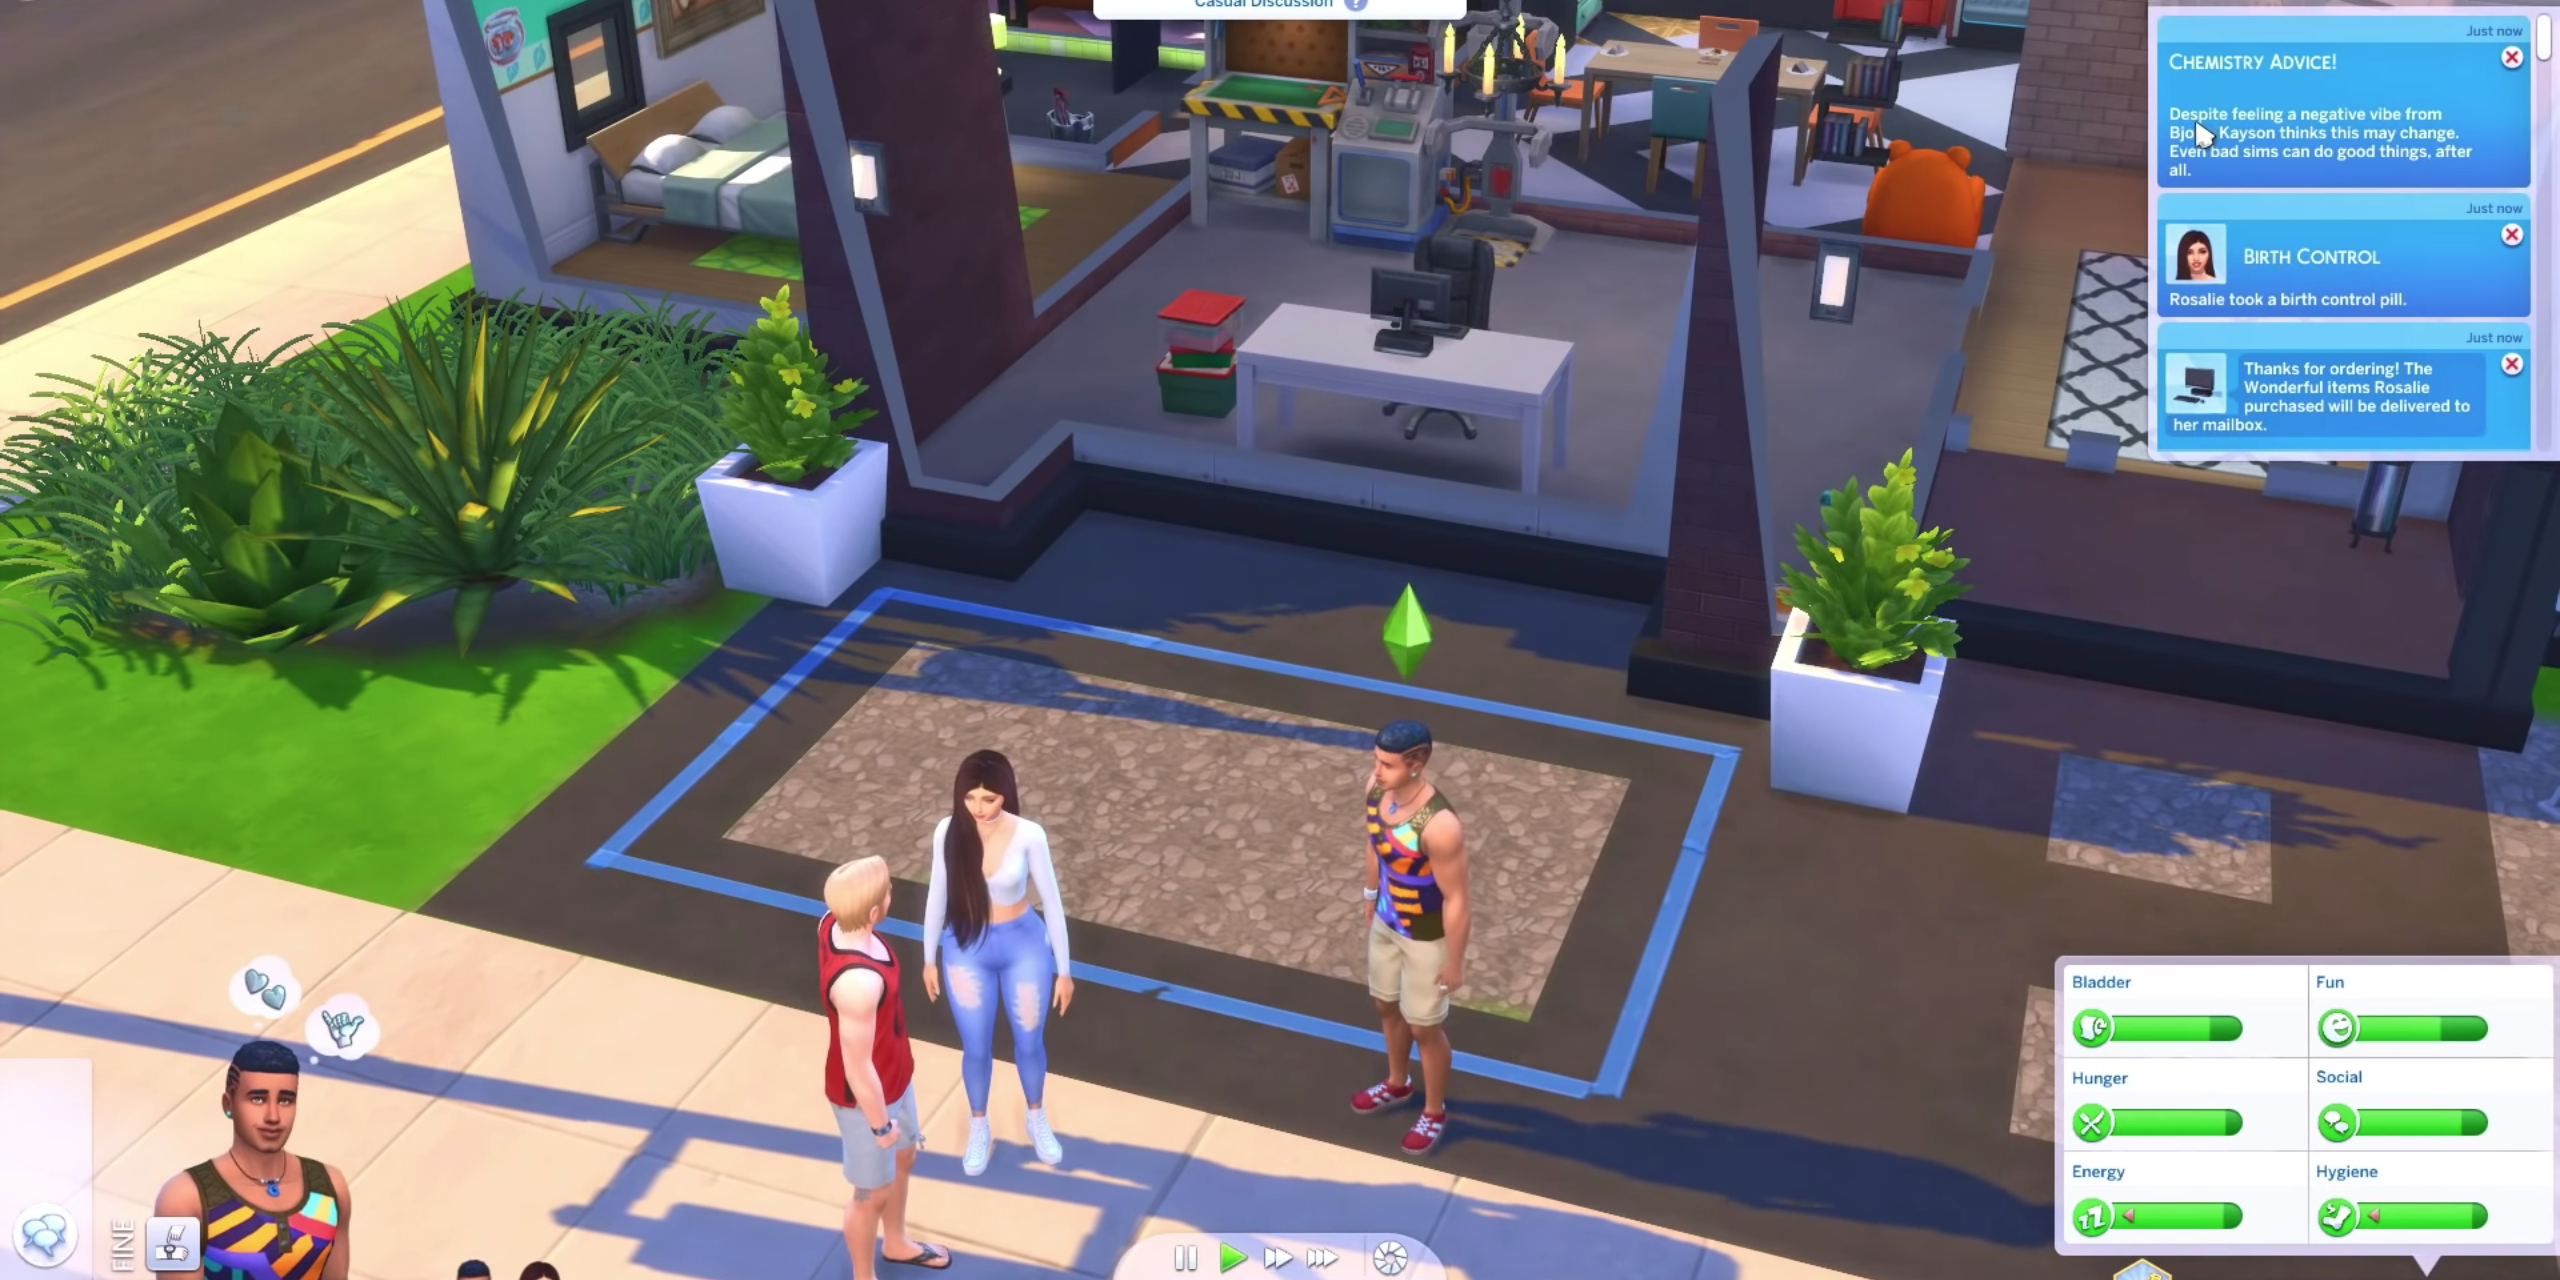 is the sims 4 wicked woohoo a thing? and why?